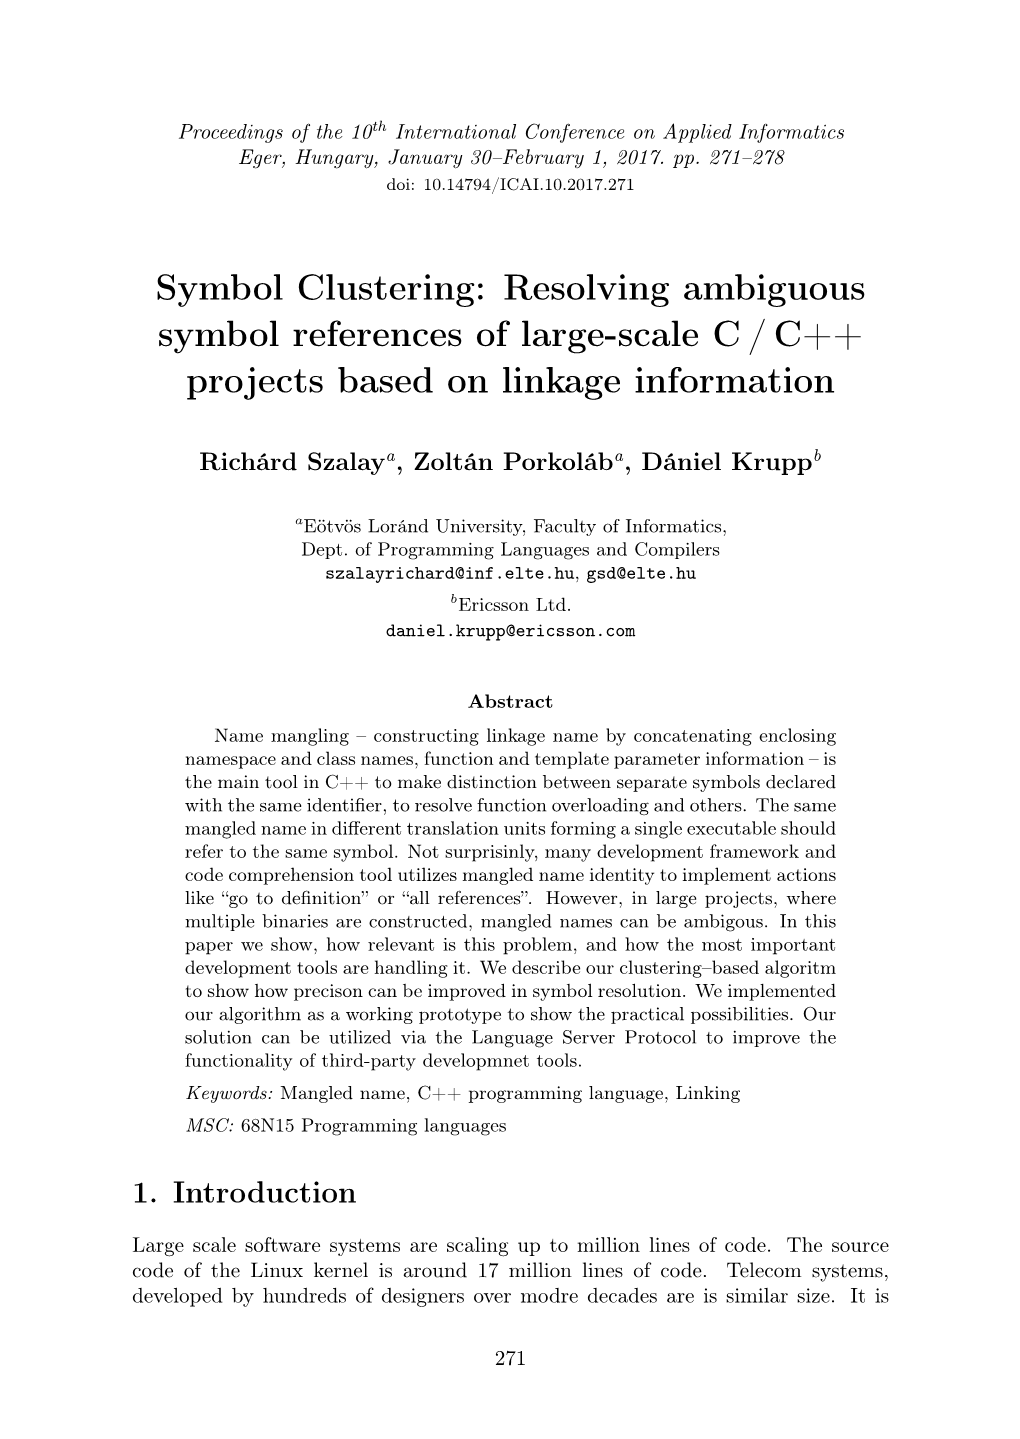 Resolving Ambiguous Symbol References of Large-Scale C / C++ Projects Based on Linkage Information